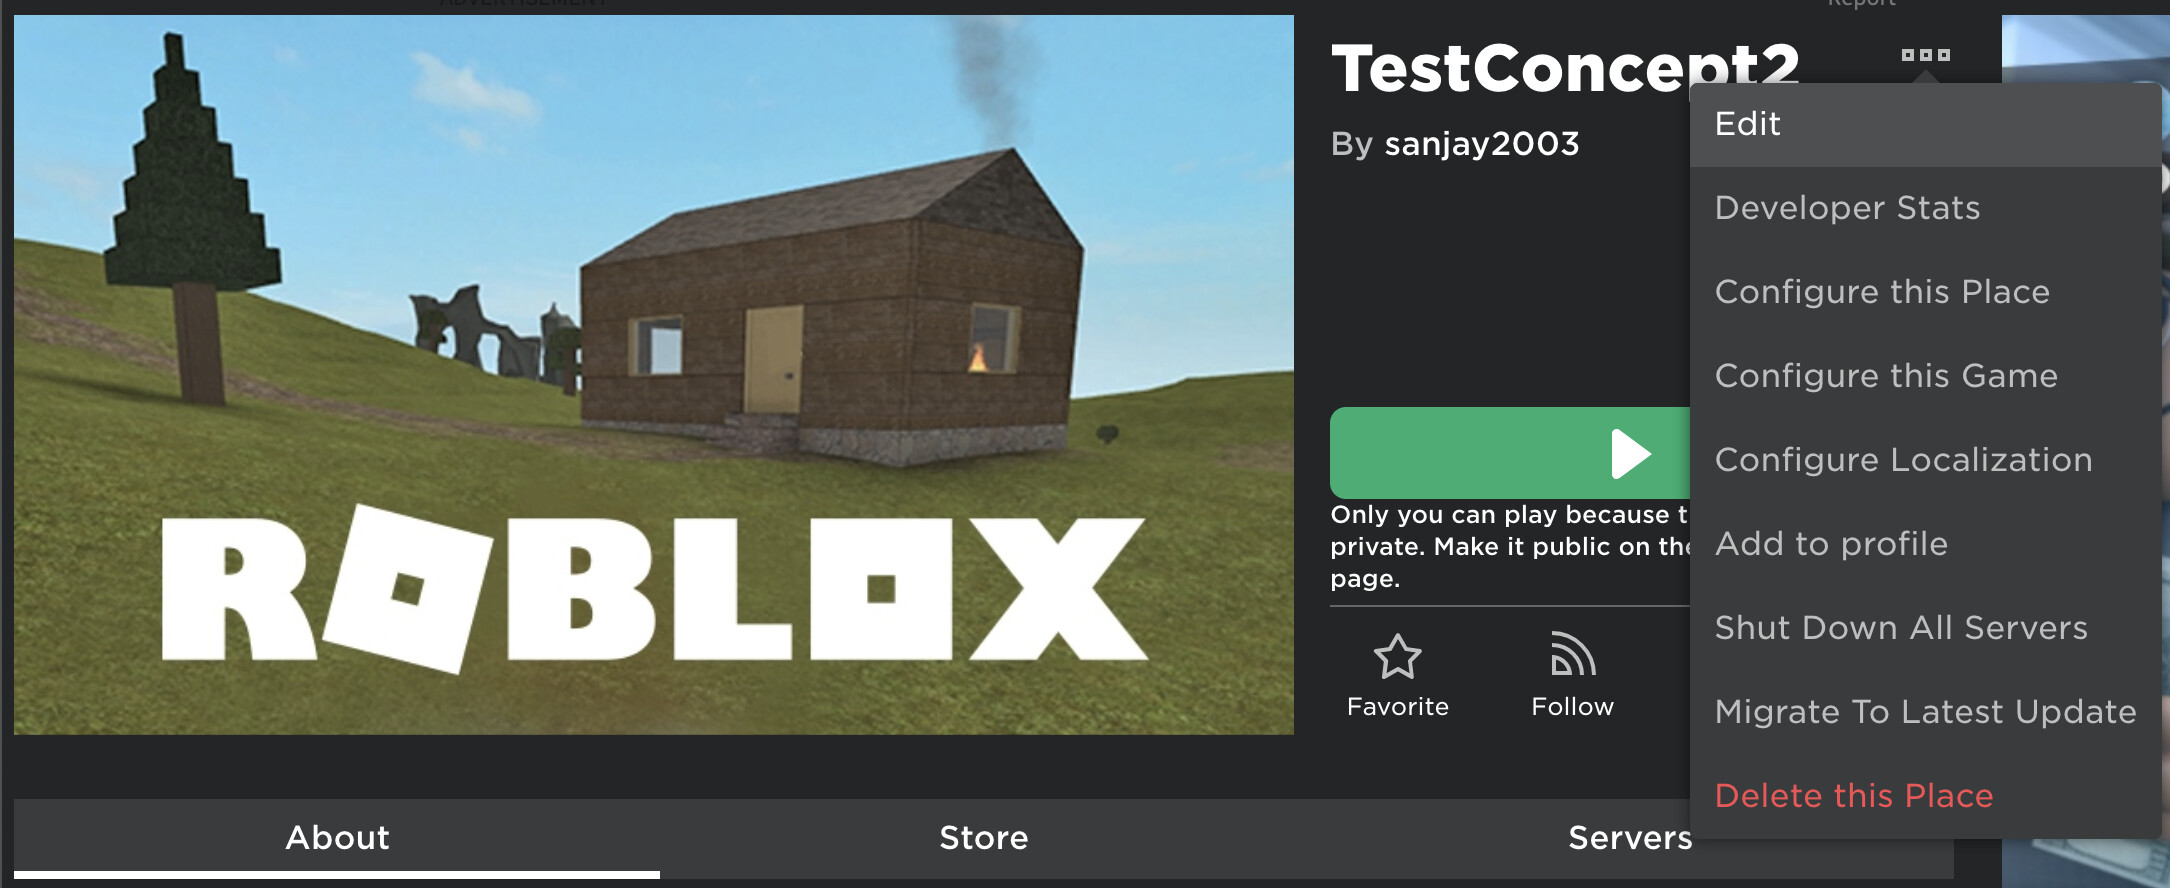 how-to-make-a-roblox-game-on-android-phone